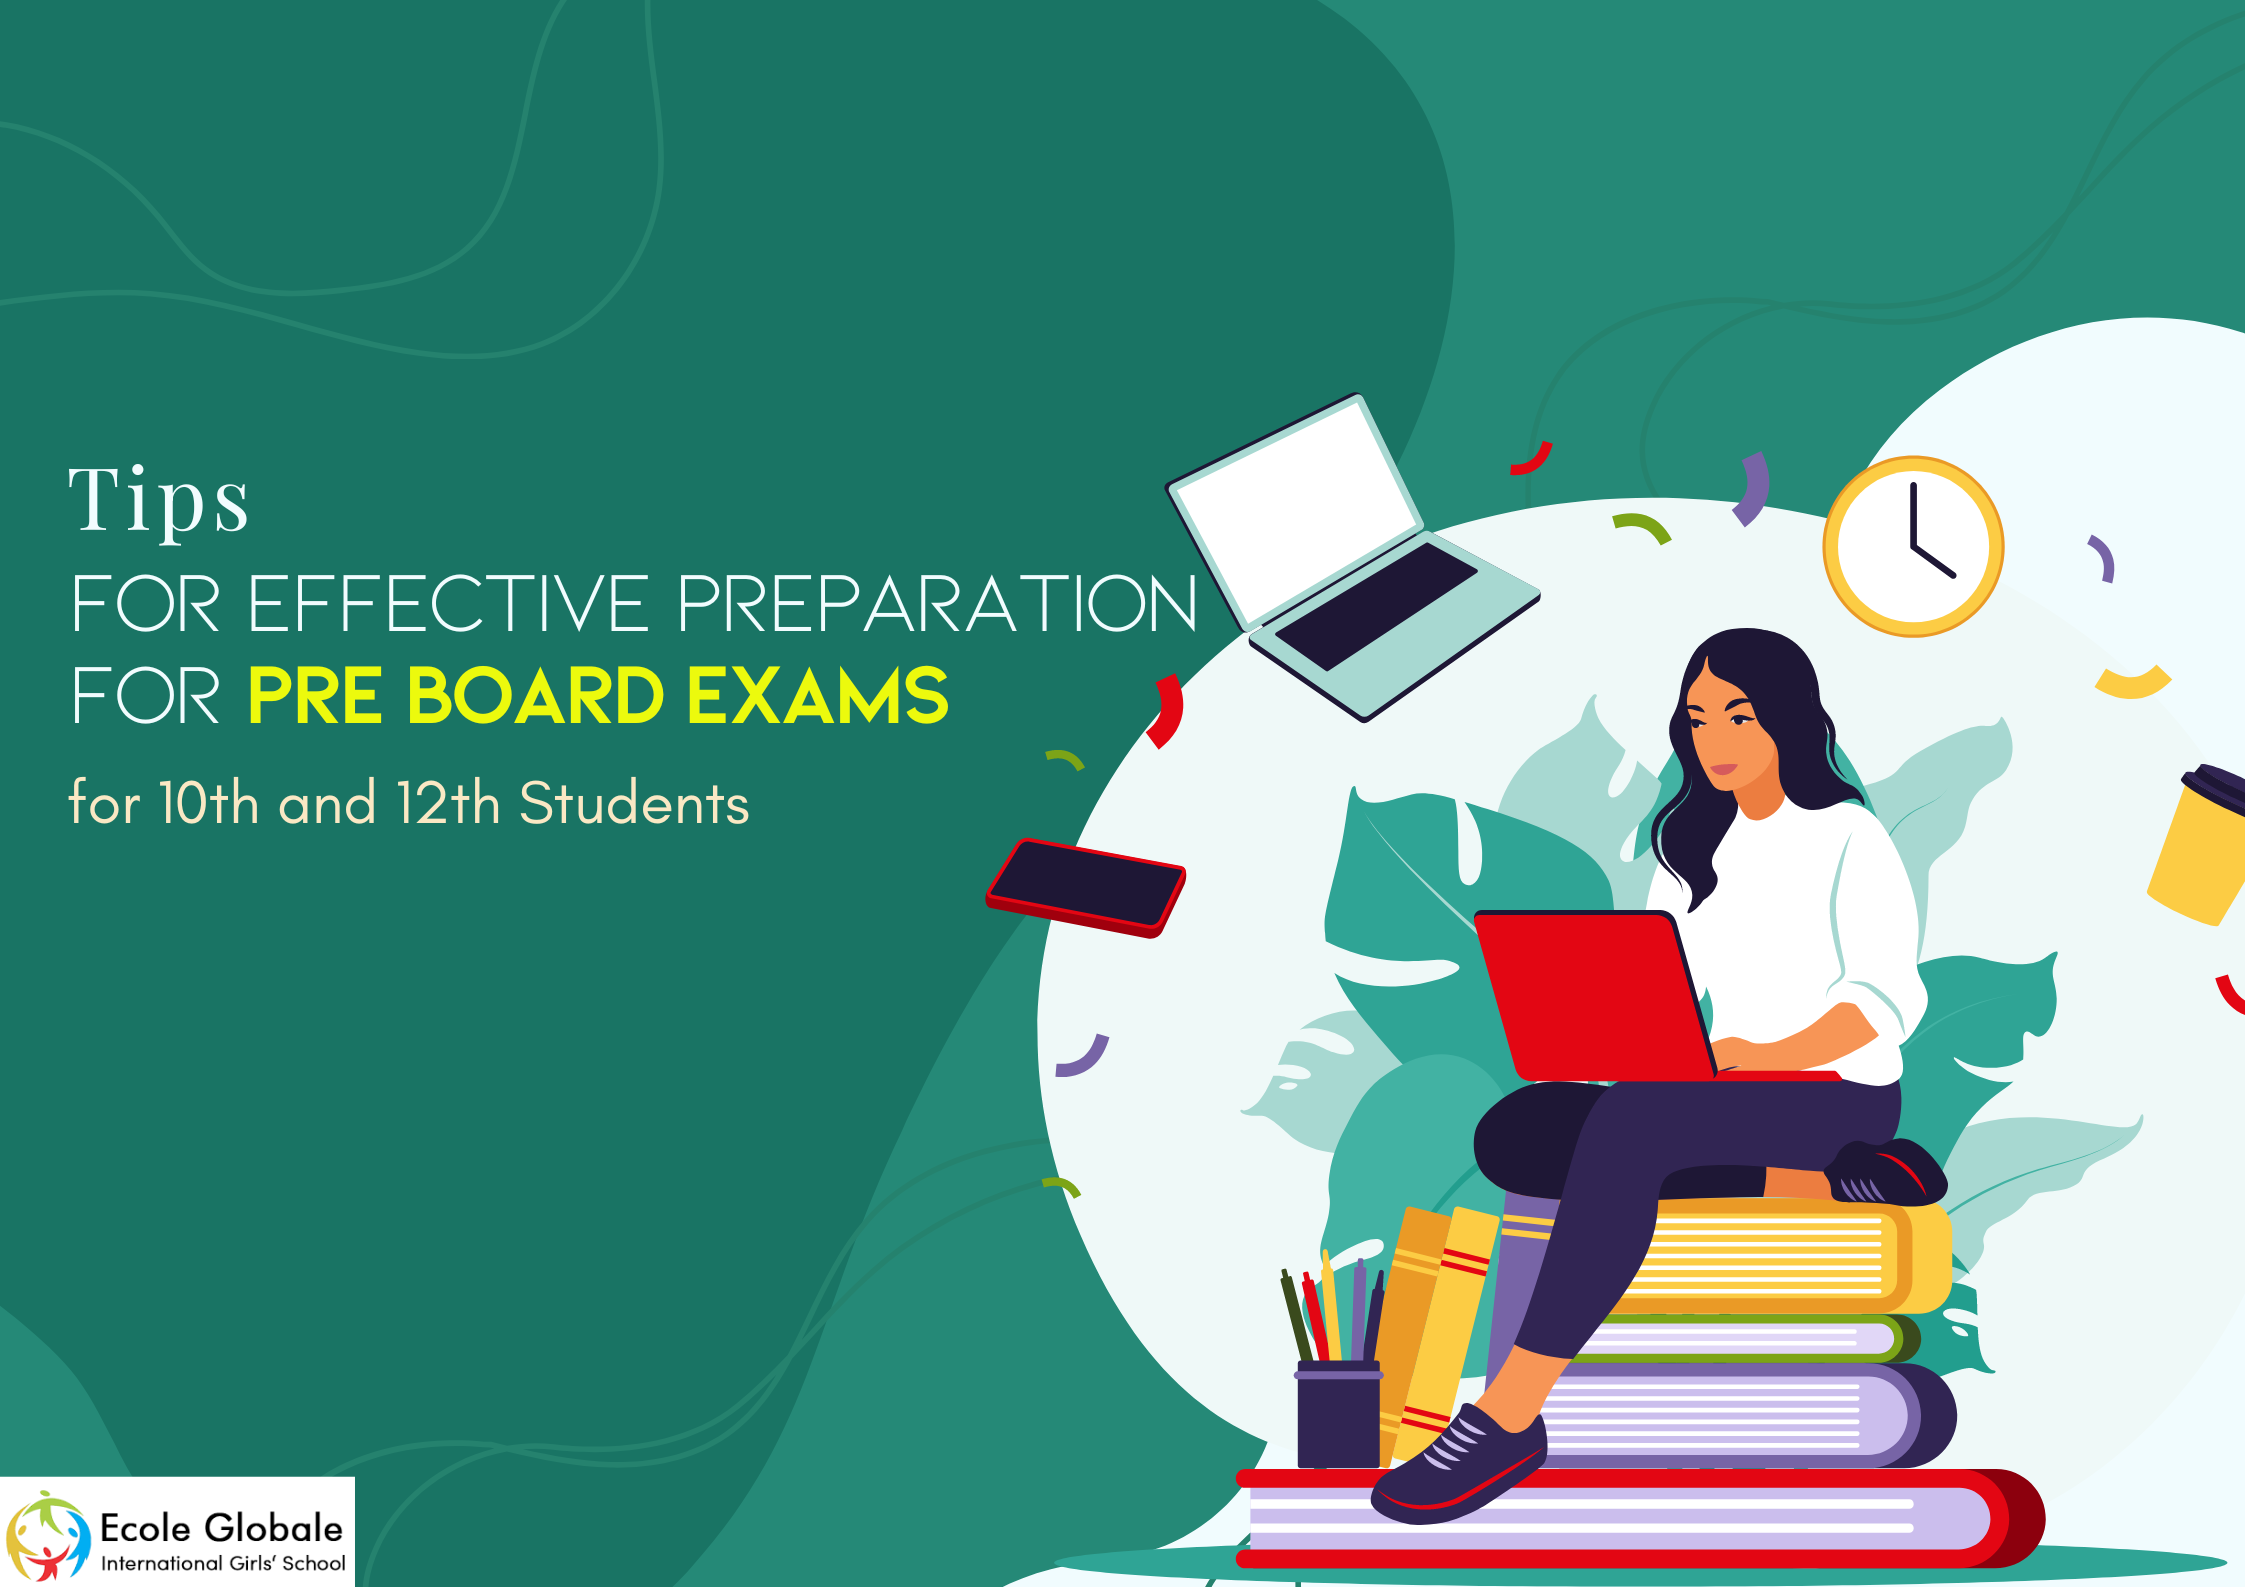 You are currently viewing Tips for Effective Preparation for Pre Board Exams for 10th and 12th Students